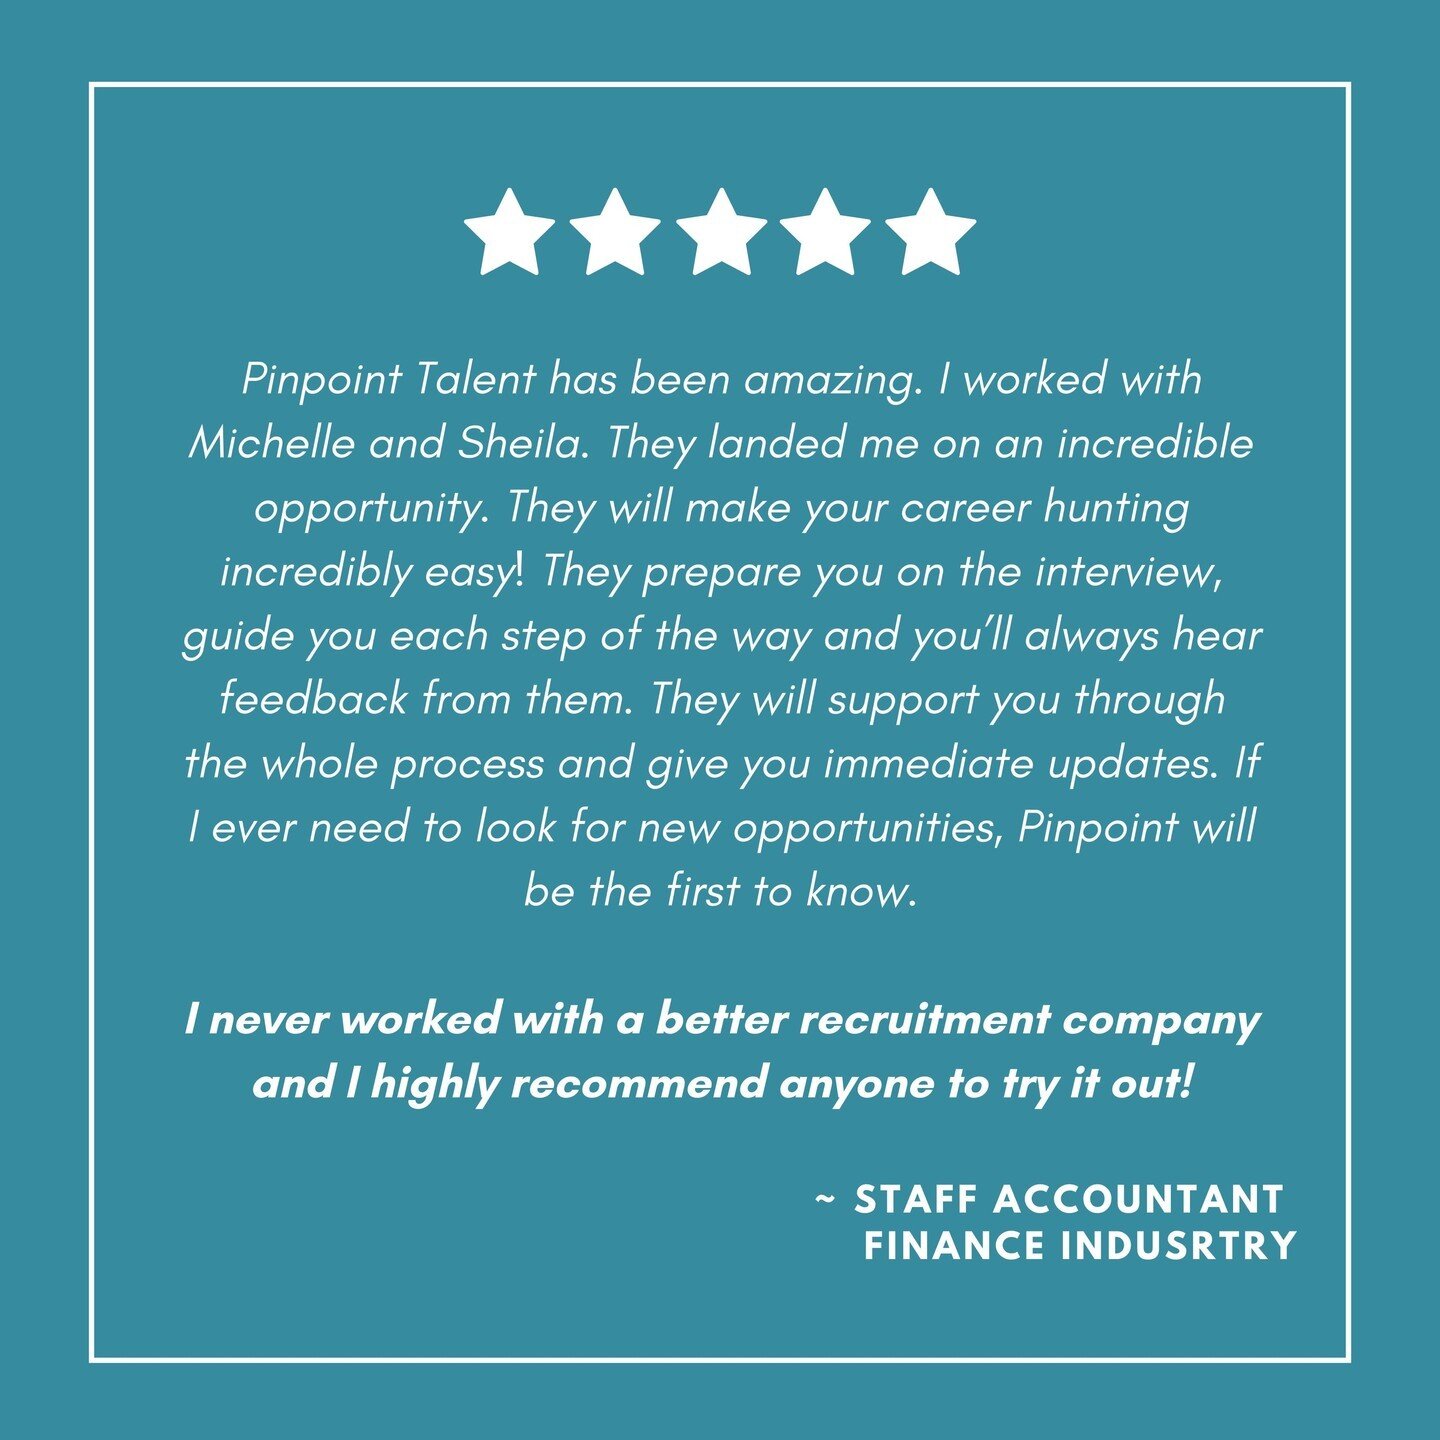 Wow, what a fantastic way to kickstart the week - an awesome customer testimonial! Exemplary work, Sheila and Michelle!! 👯

Our customers are everything to us and we truly value each and every experience that we take part in facilitating. 

Your wor